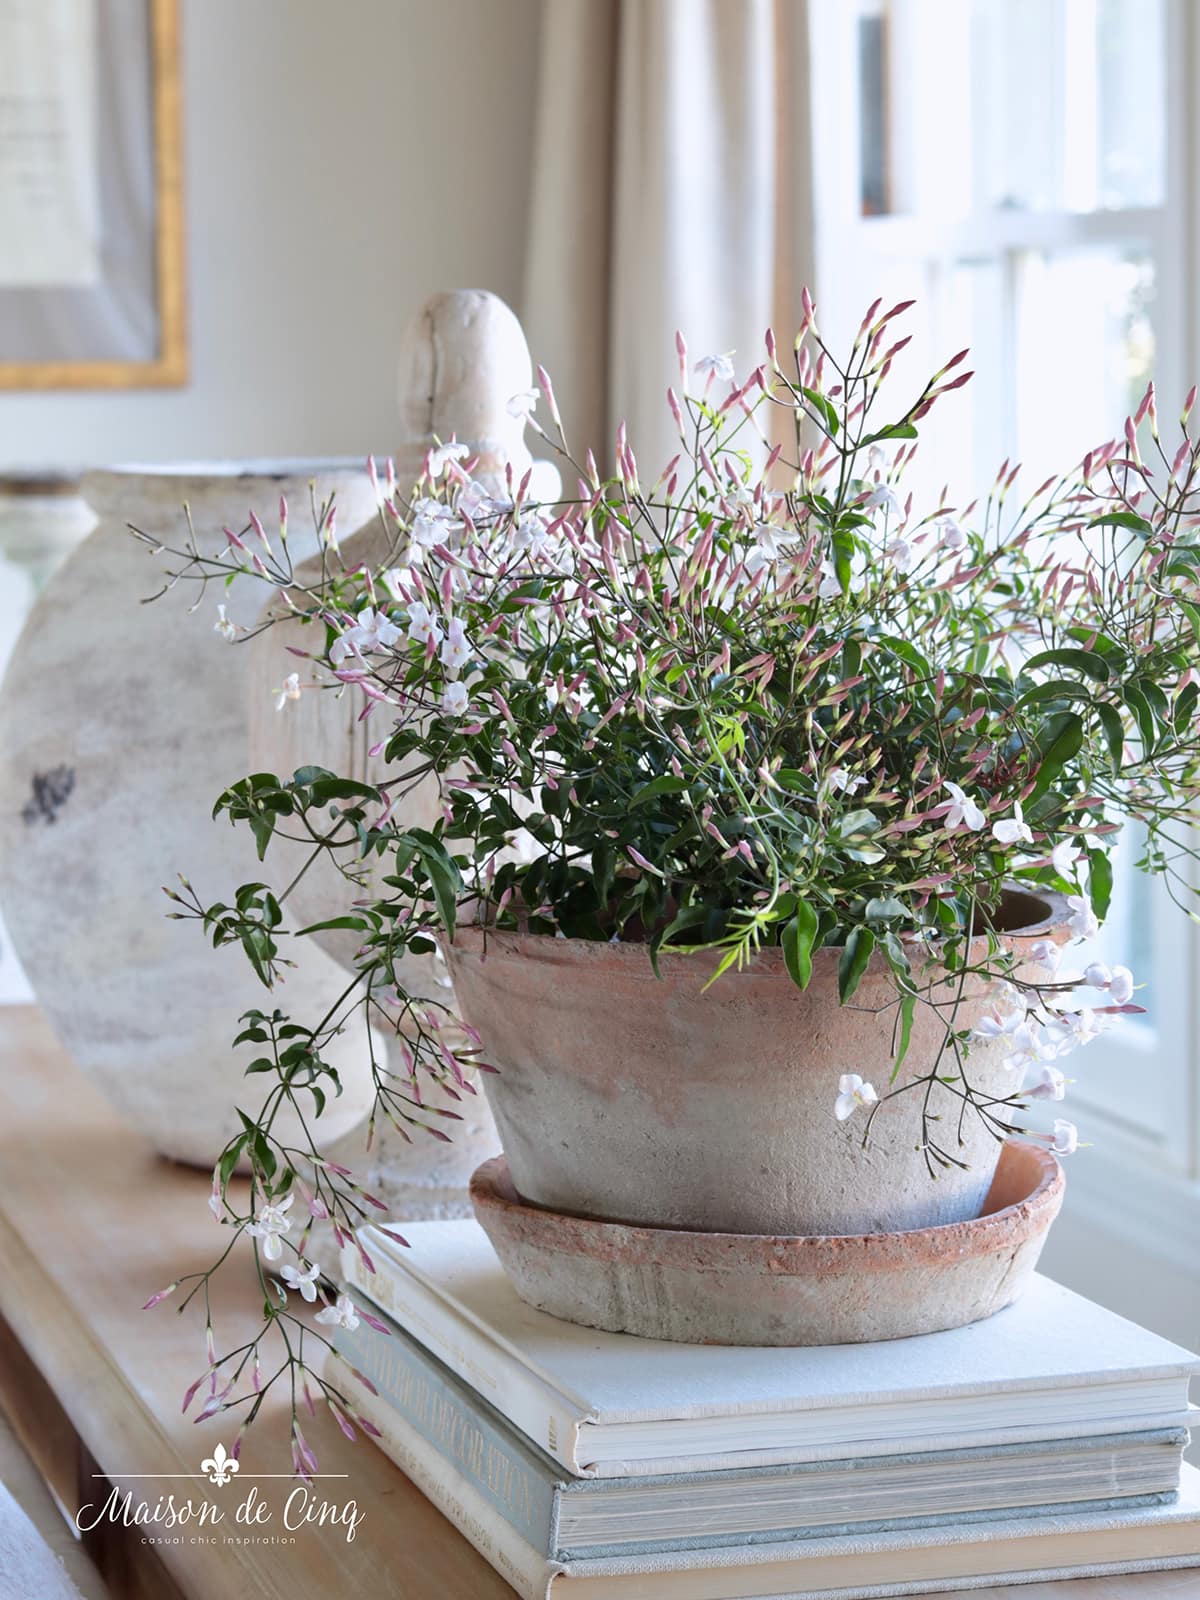 How to give your home a spring refresh